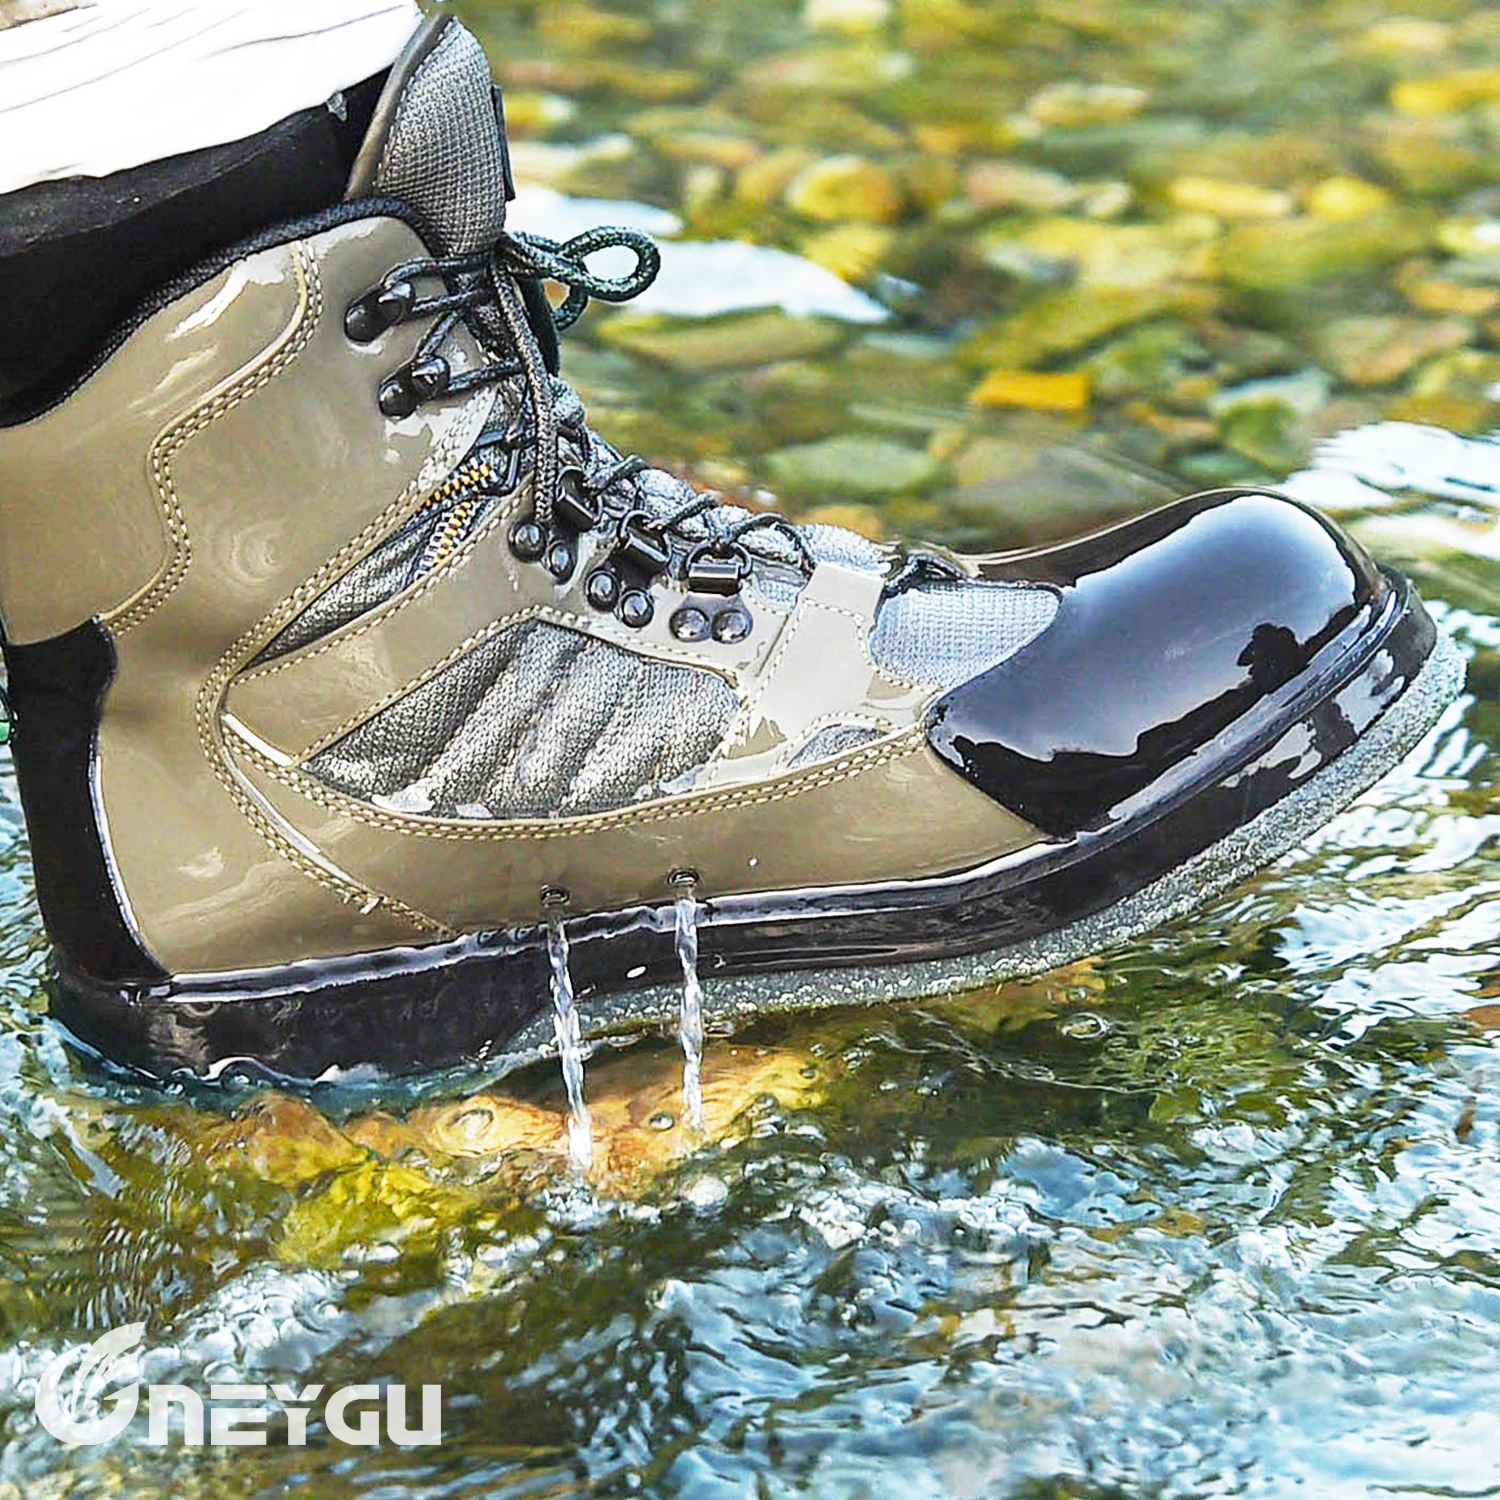 NEYGU outdoor quick-dry wading shoes with felt sole ,anti-slippery fly  fishing wader boots